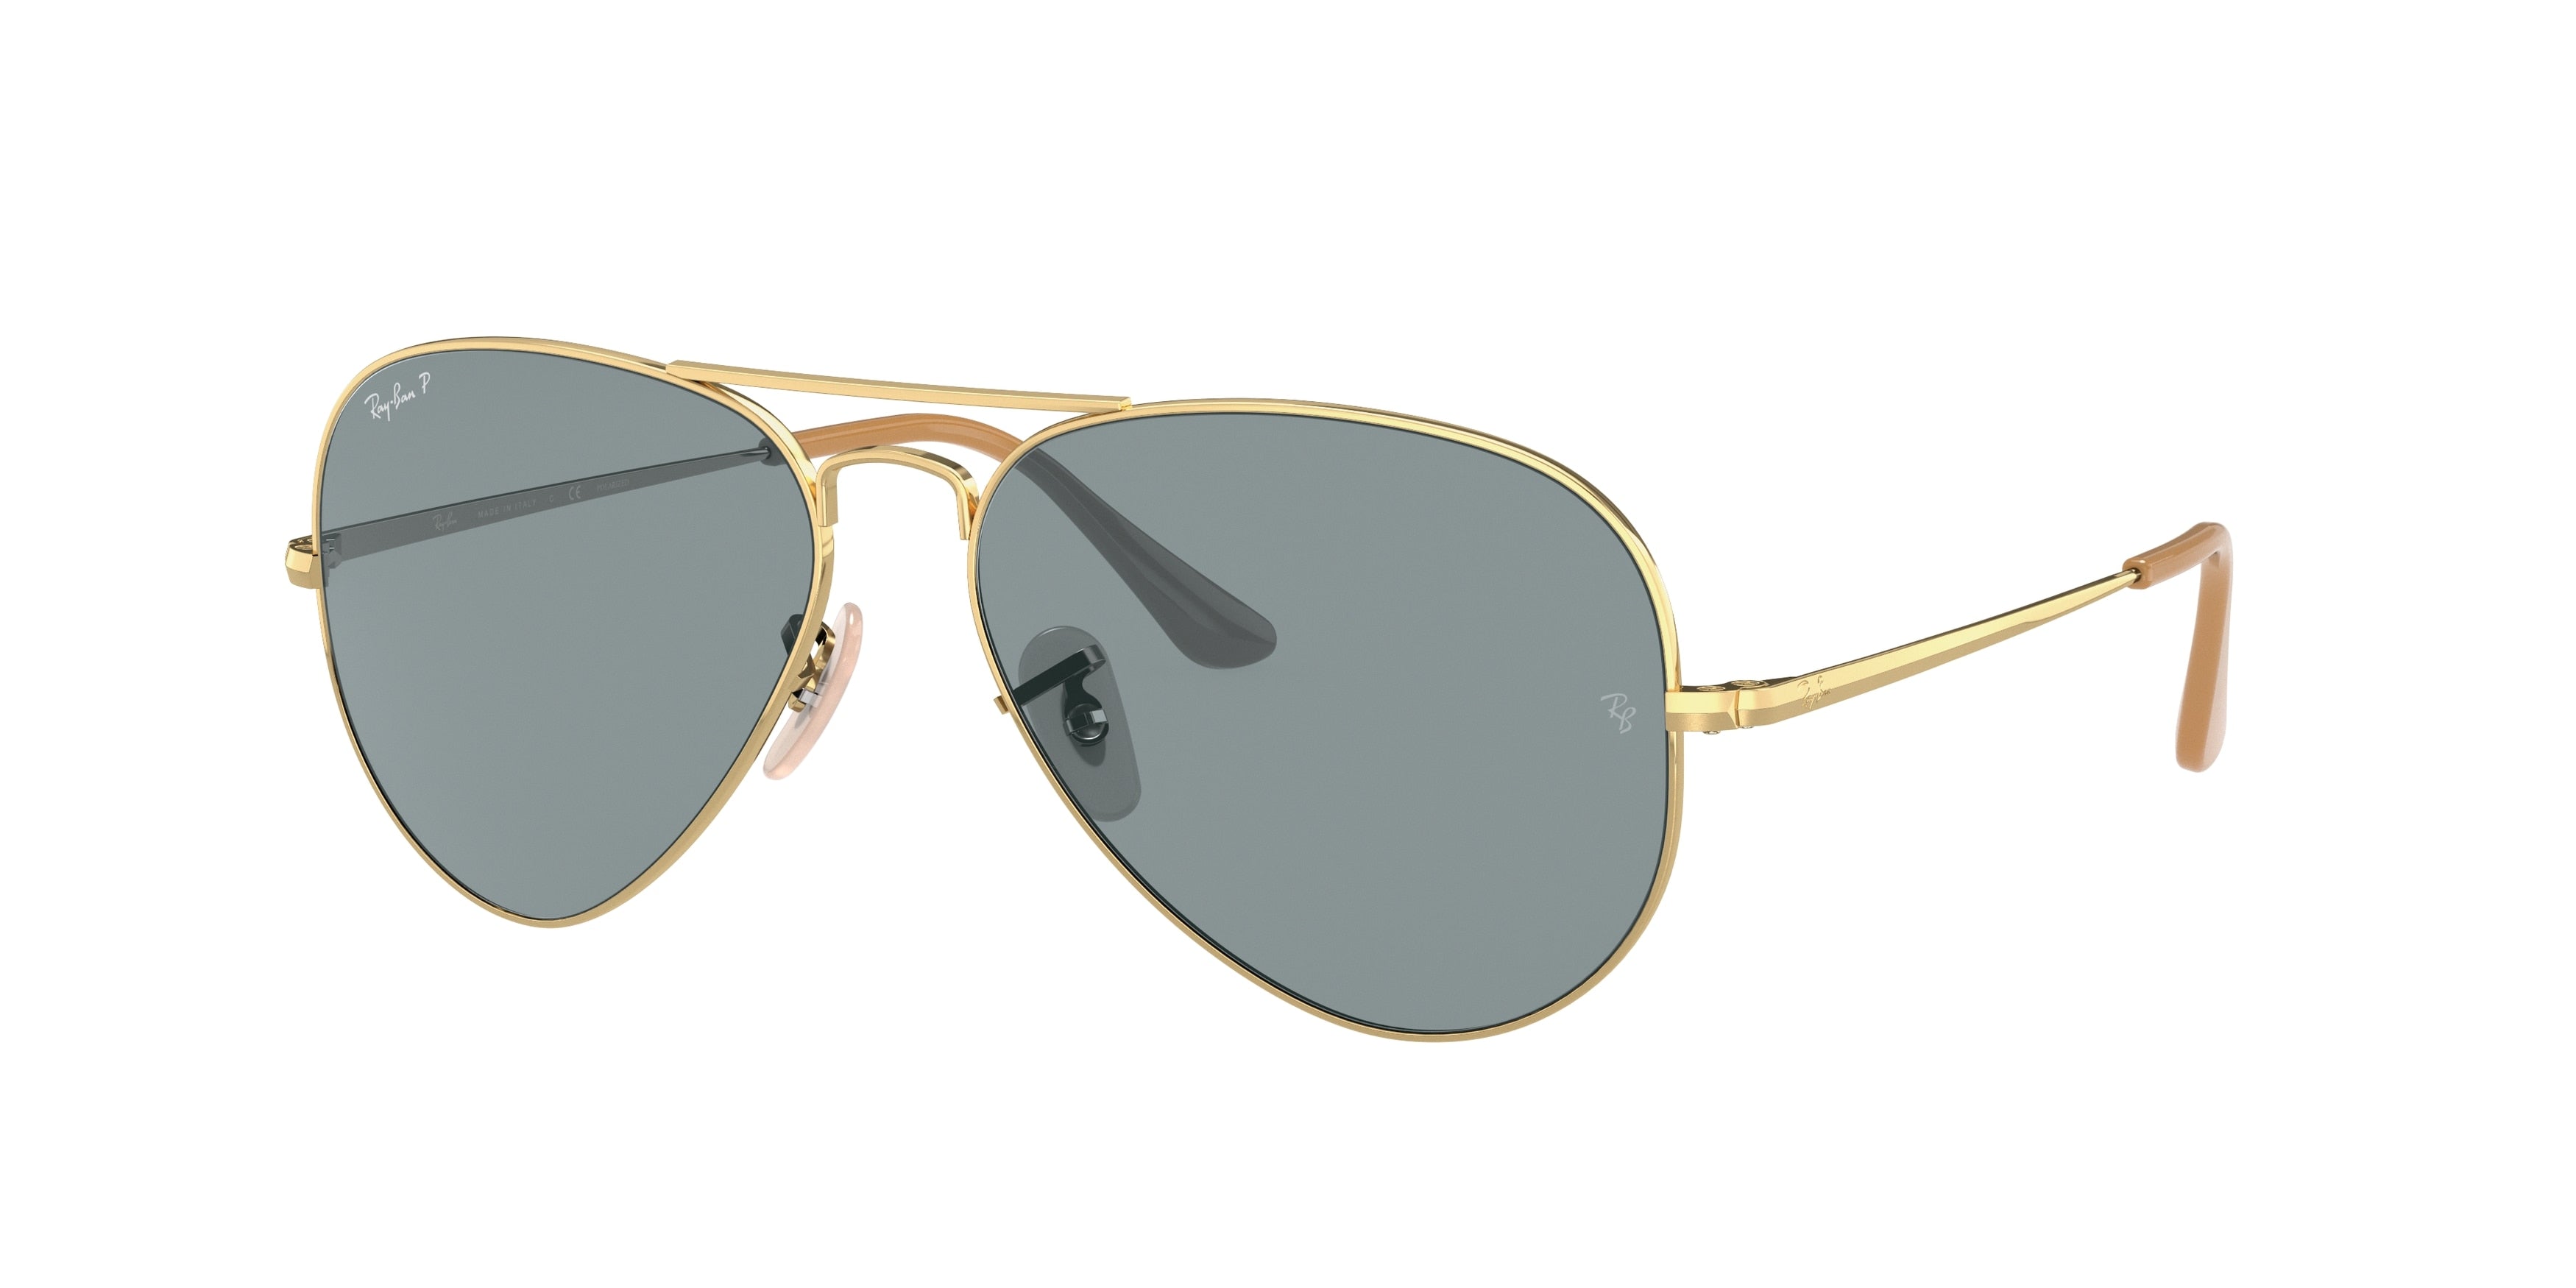 Ray-Ban AVIATOR METAL II RB3689 Pilot Sunglasses  9064S2-Gold 61-140-14 - Color Map Gold